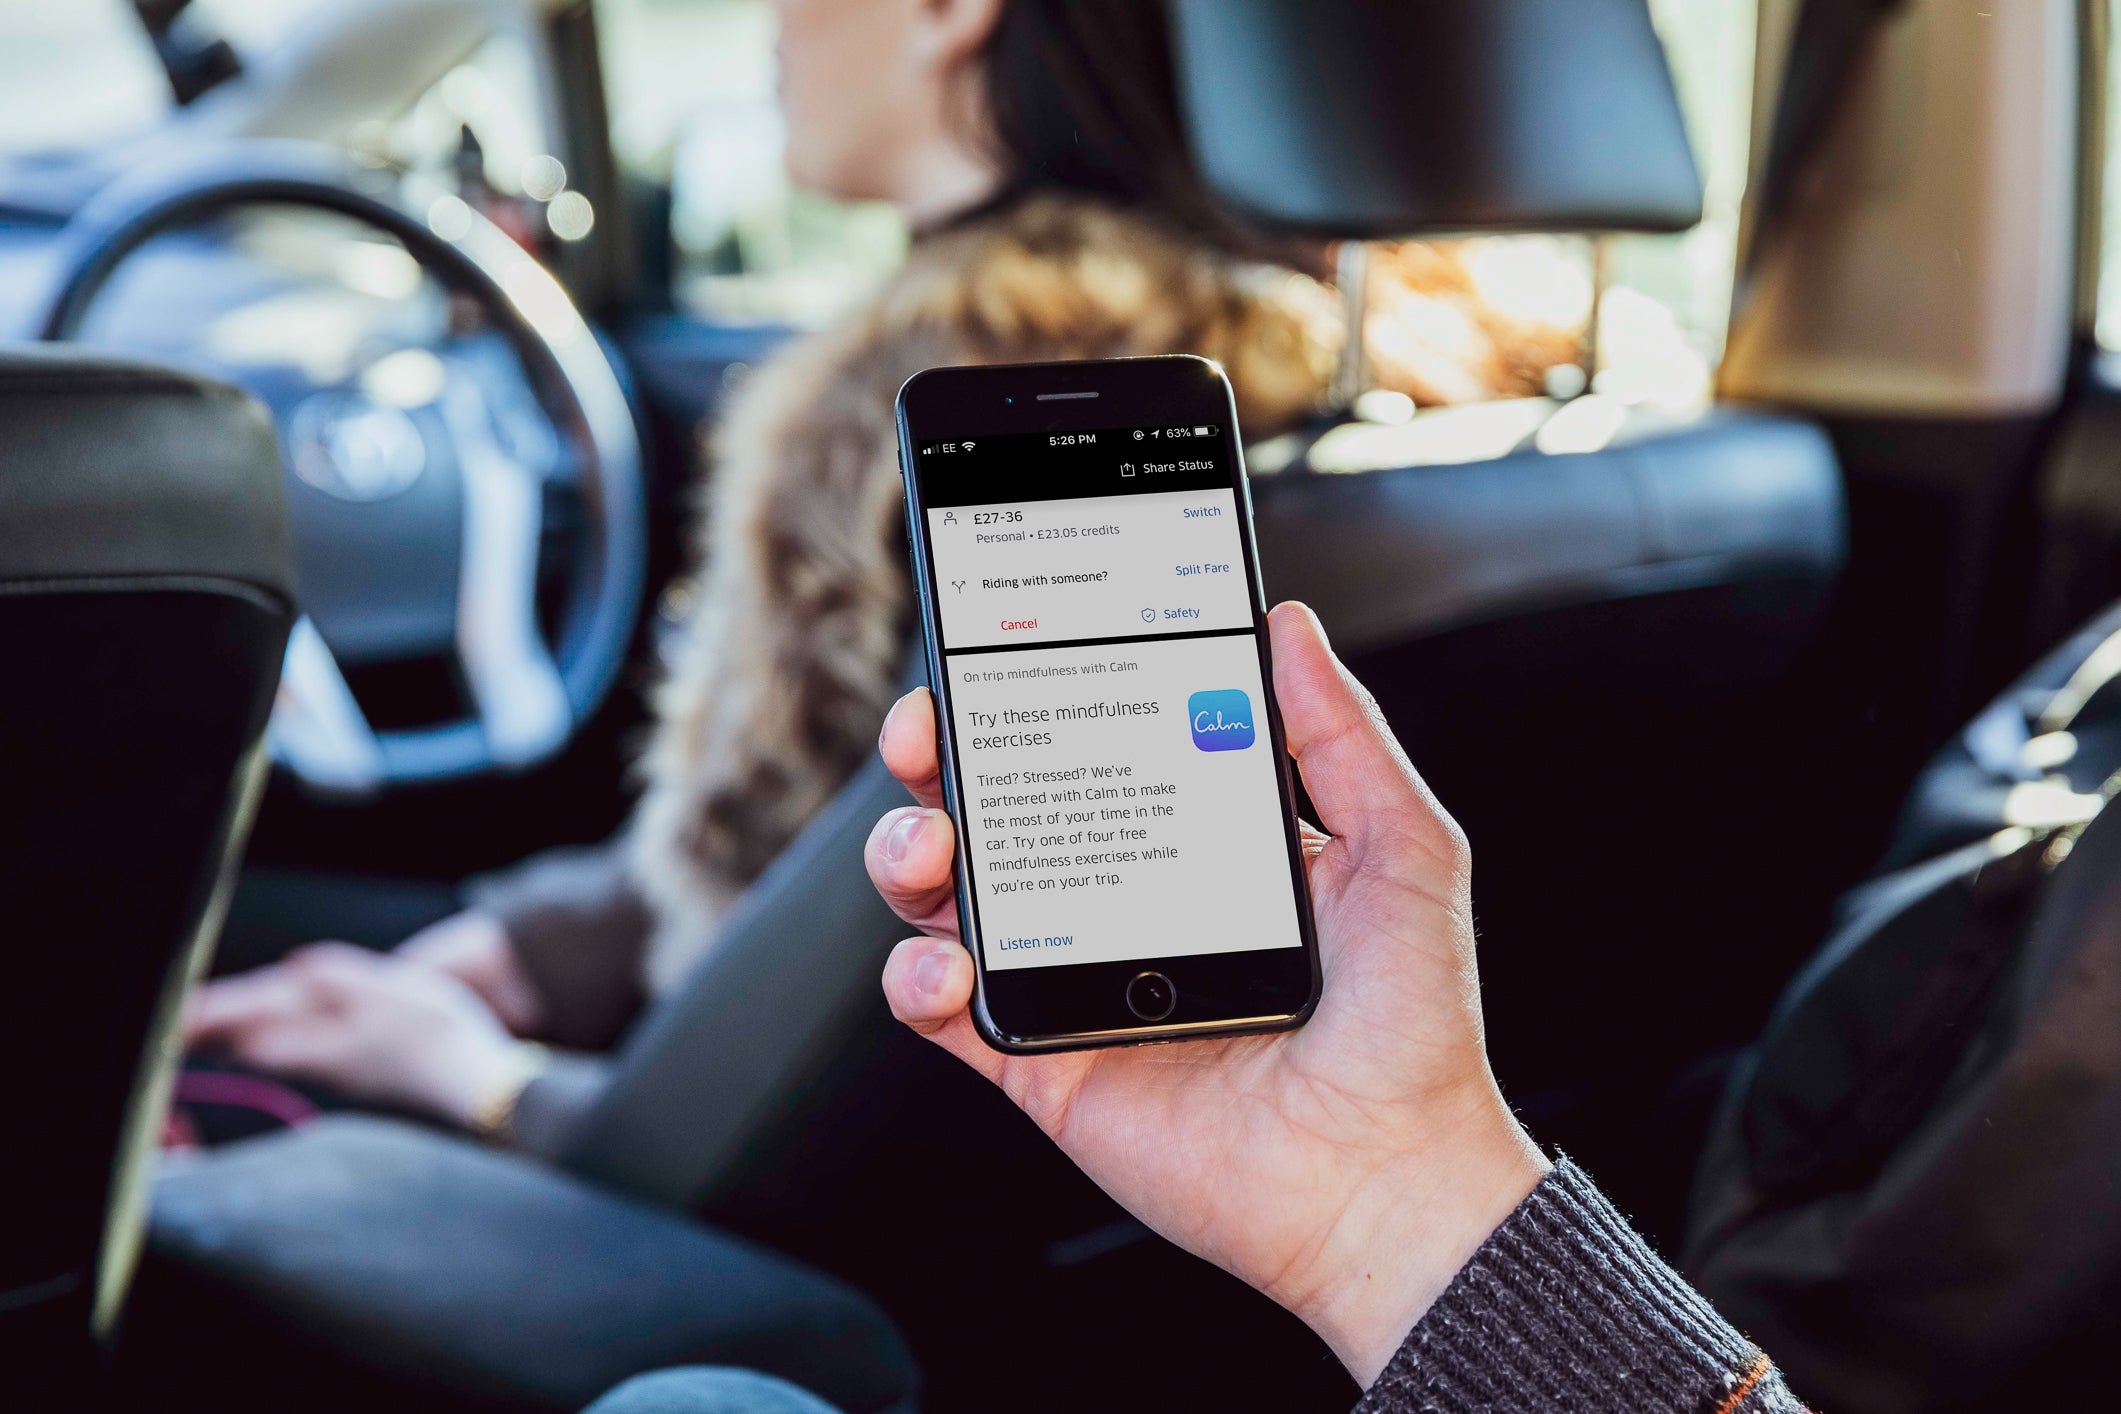 Uber has partnered with meditation app Calm in the UK to offer in-app mindfulness exercises